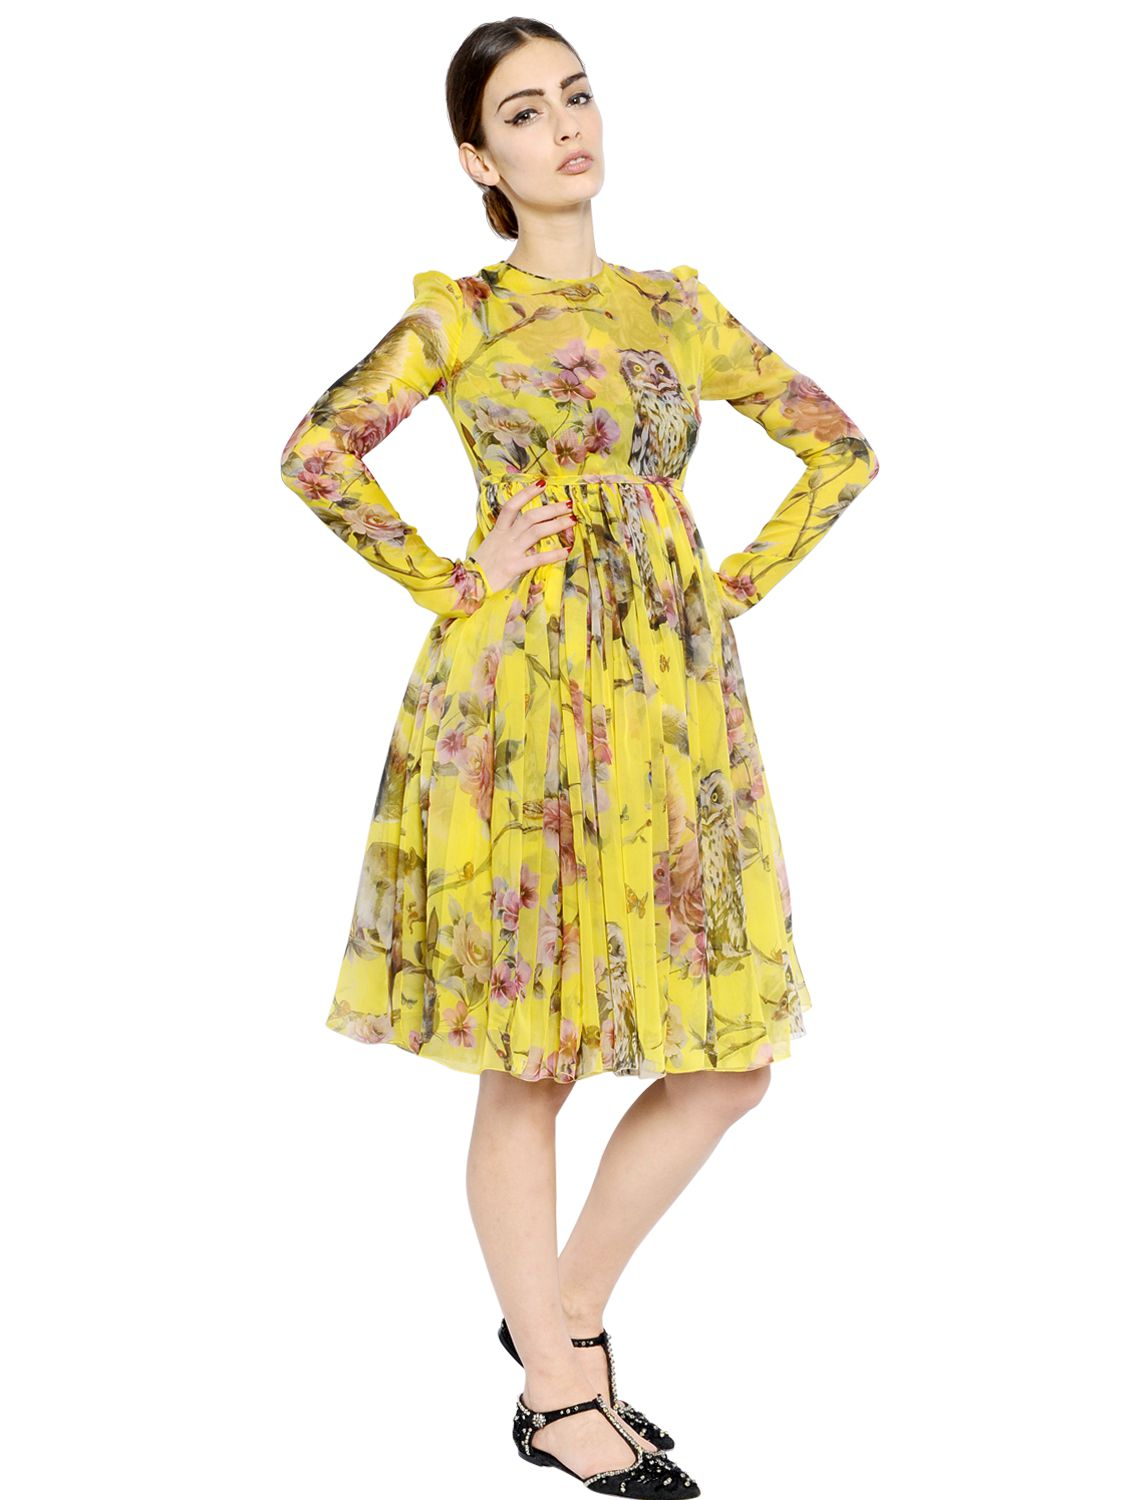 Buy > yellow floral chiffon dress > in stock